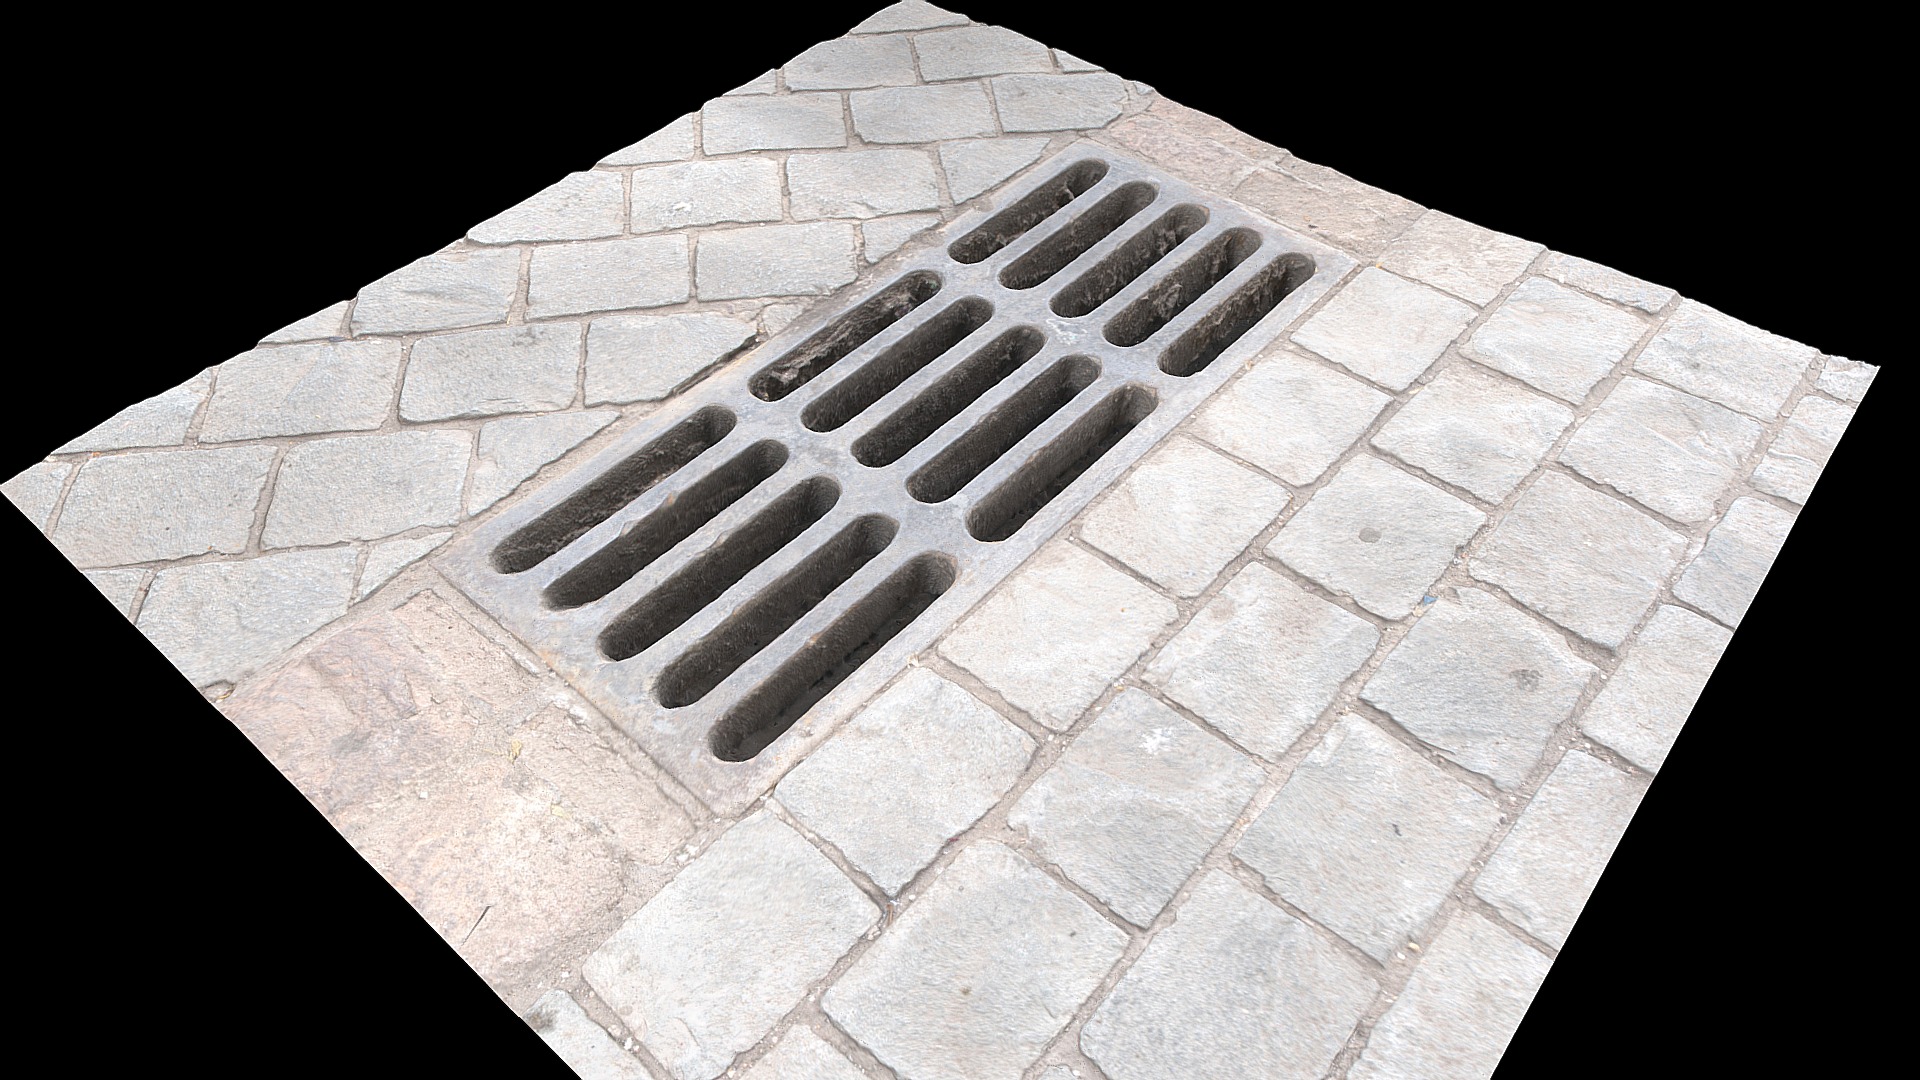 3D model 2018-01 – Santiago – Ground 6 (Drain) - This is a 3D model of the 2018-01 - Santiago - Ground 6 (Drain). The 3D model is about a stone walkway with a pattern.